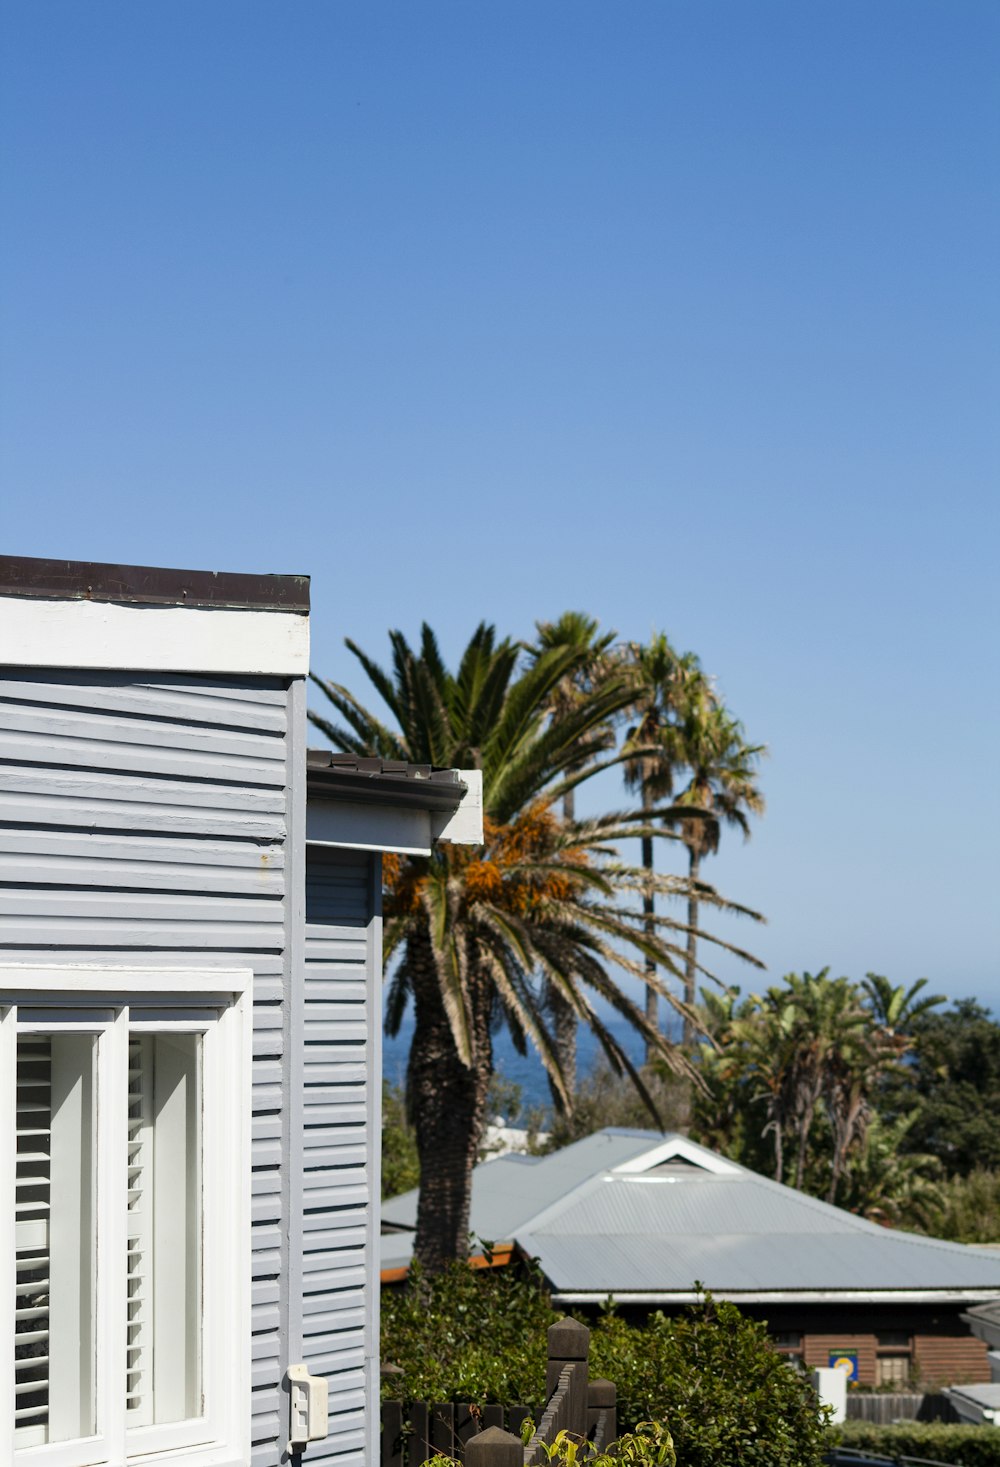 a blue house with white shutters and a palm tree